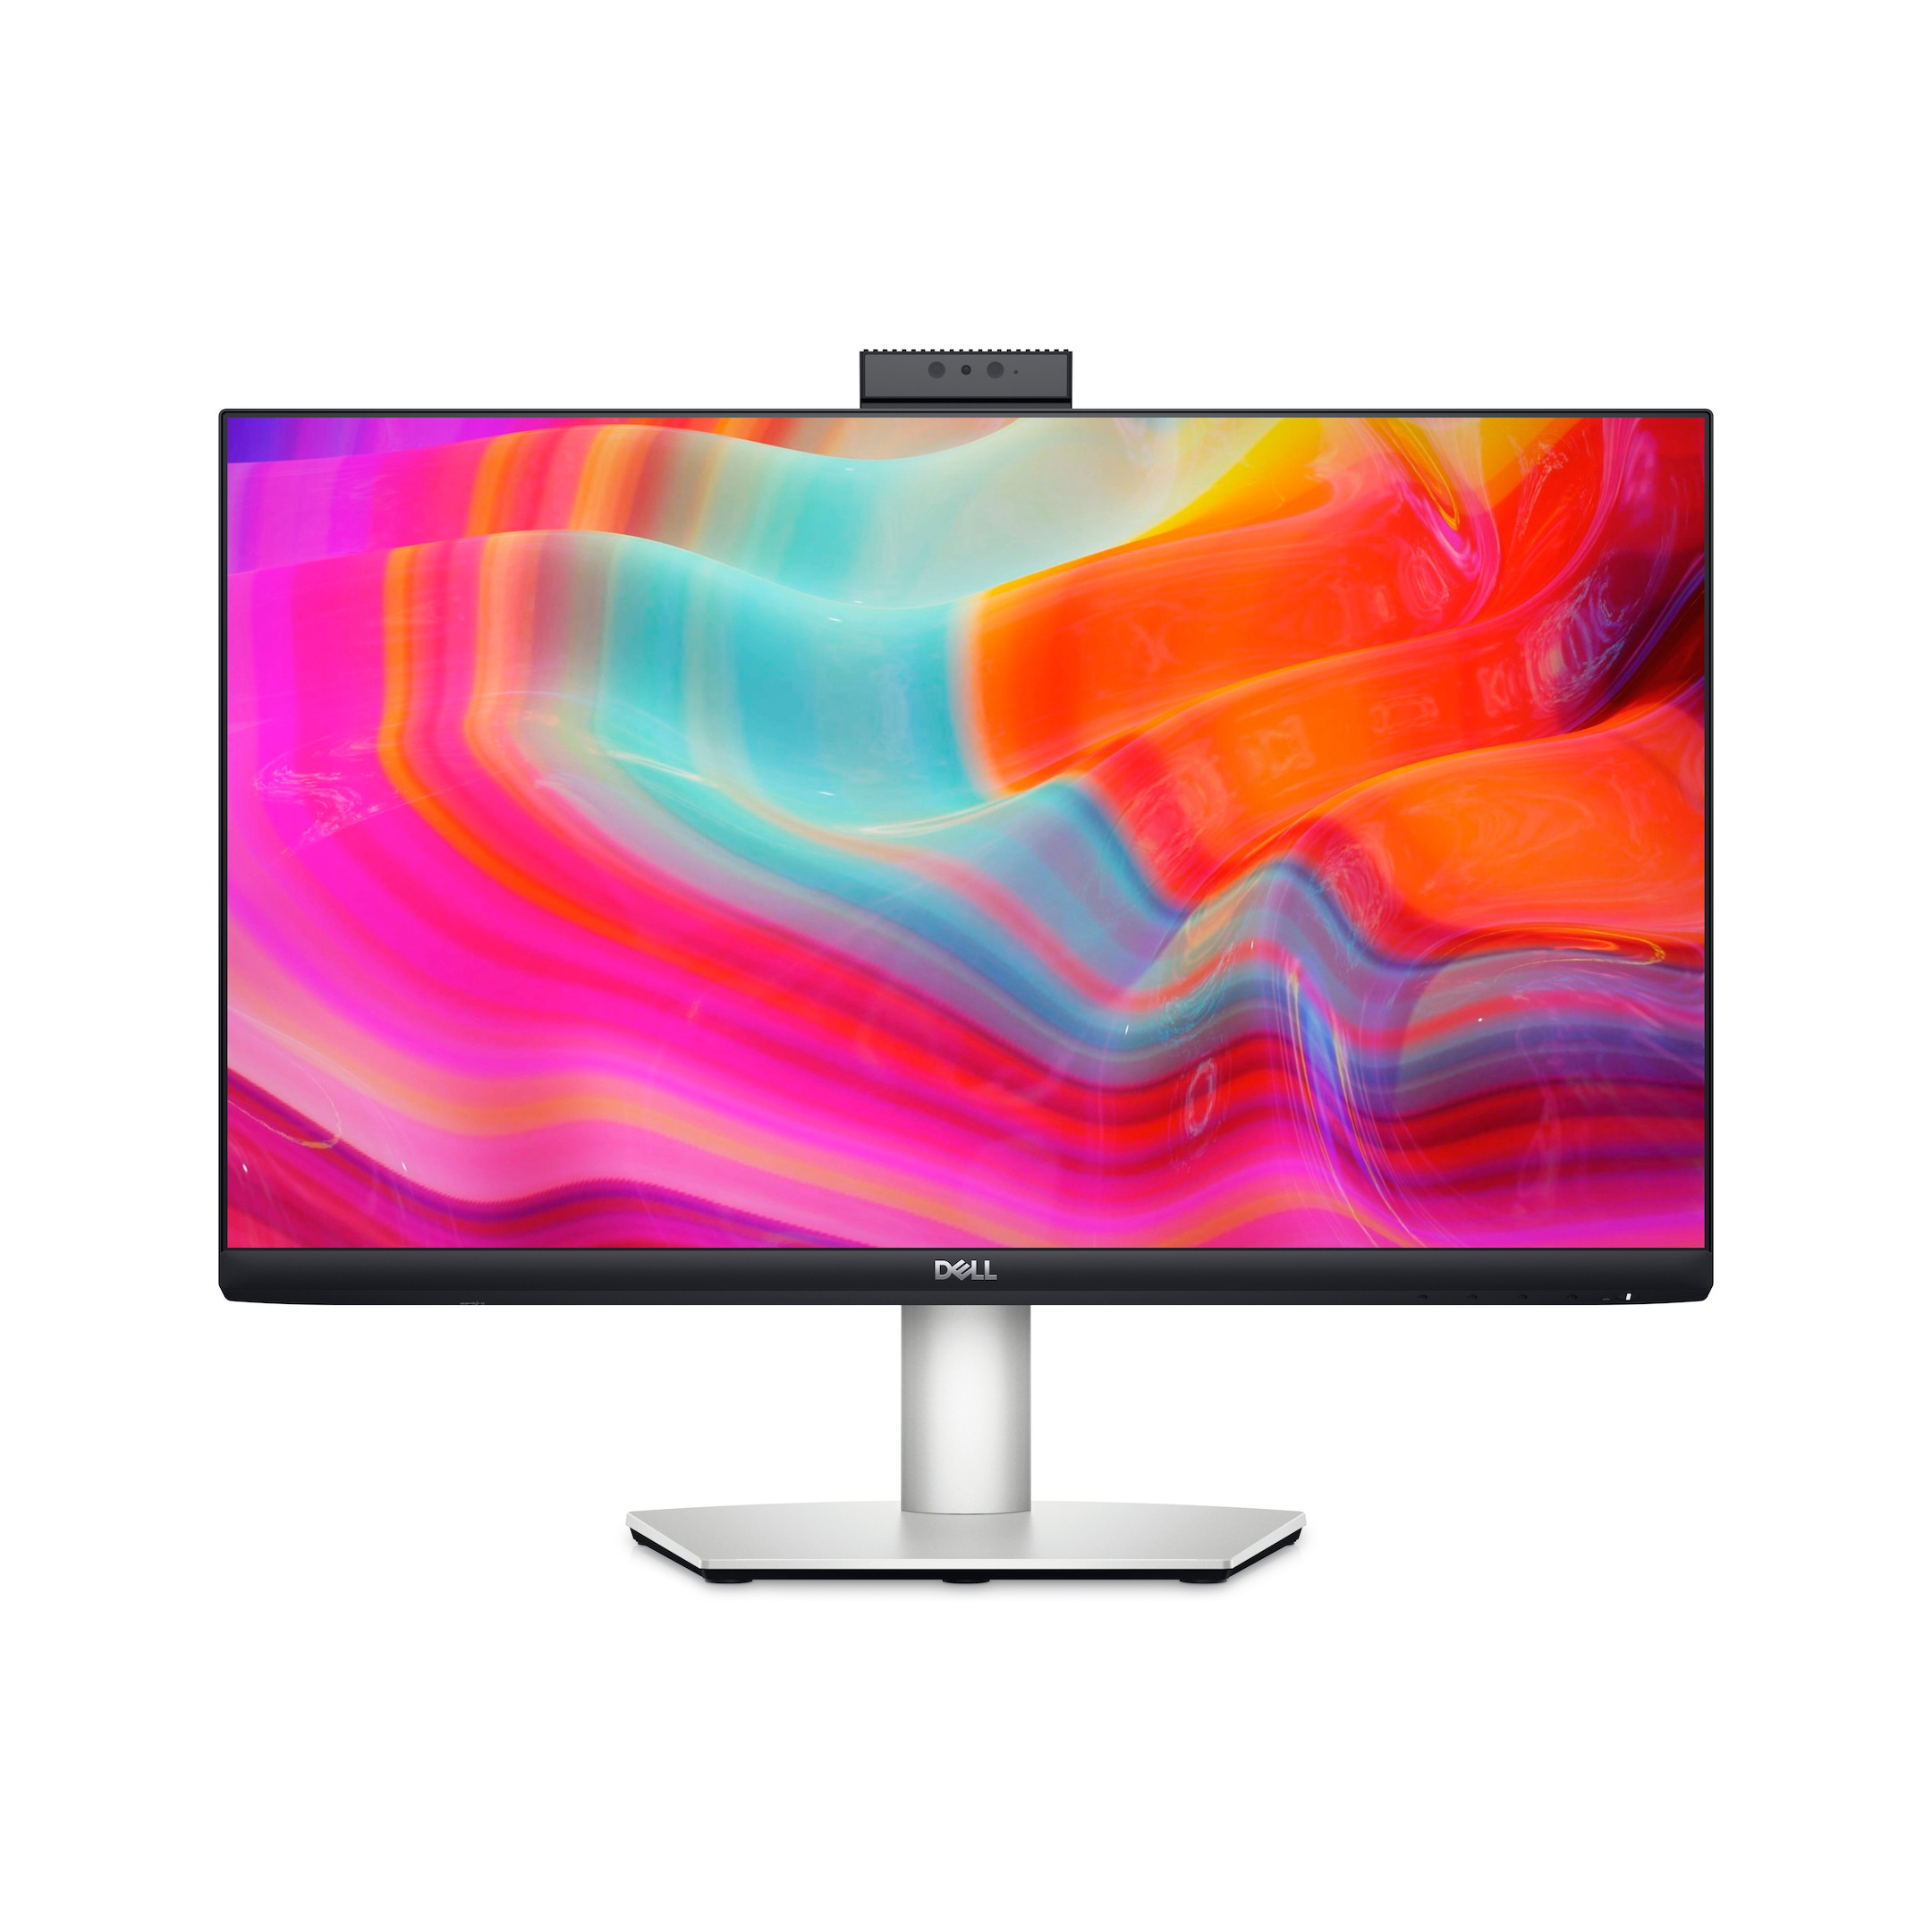 Monitors 24 « 68.5 - inches 27 discover (60 here cm) to